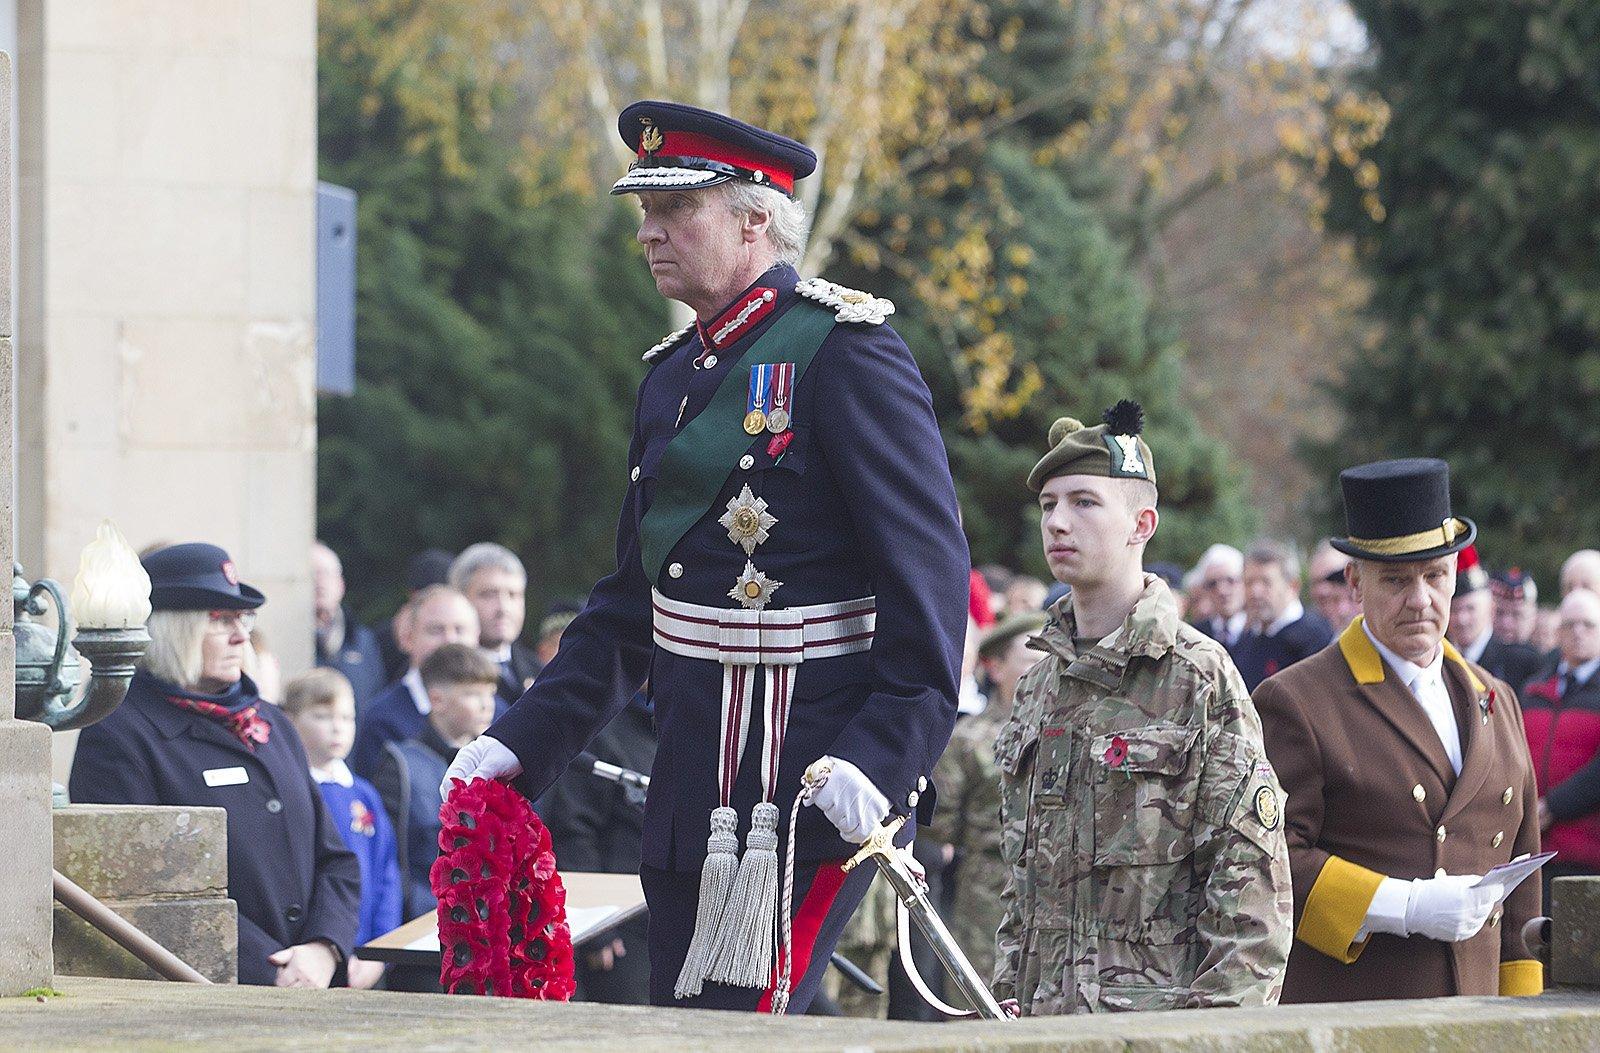 Blake Sommerville, Cadet Sgt Major and the Duke of Buccleuch lay a wreath at Hawick war memorial.